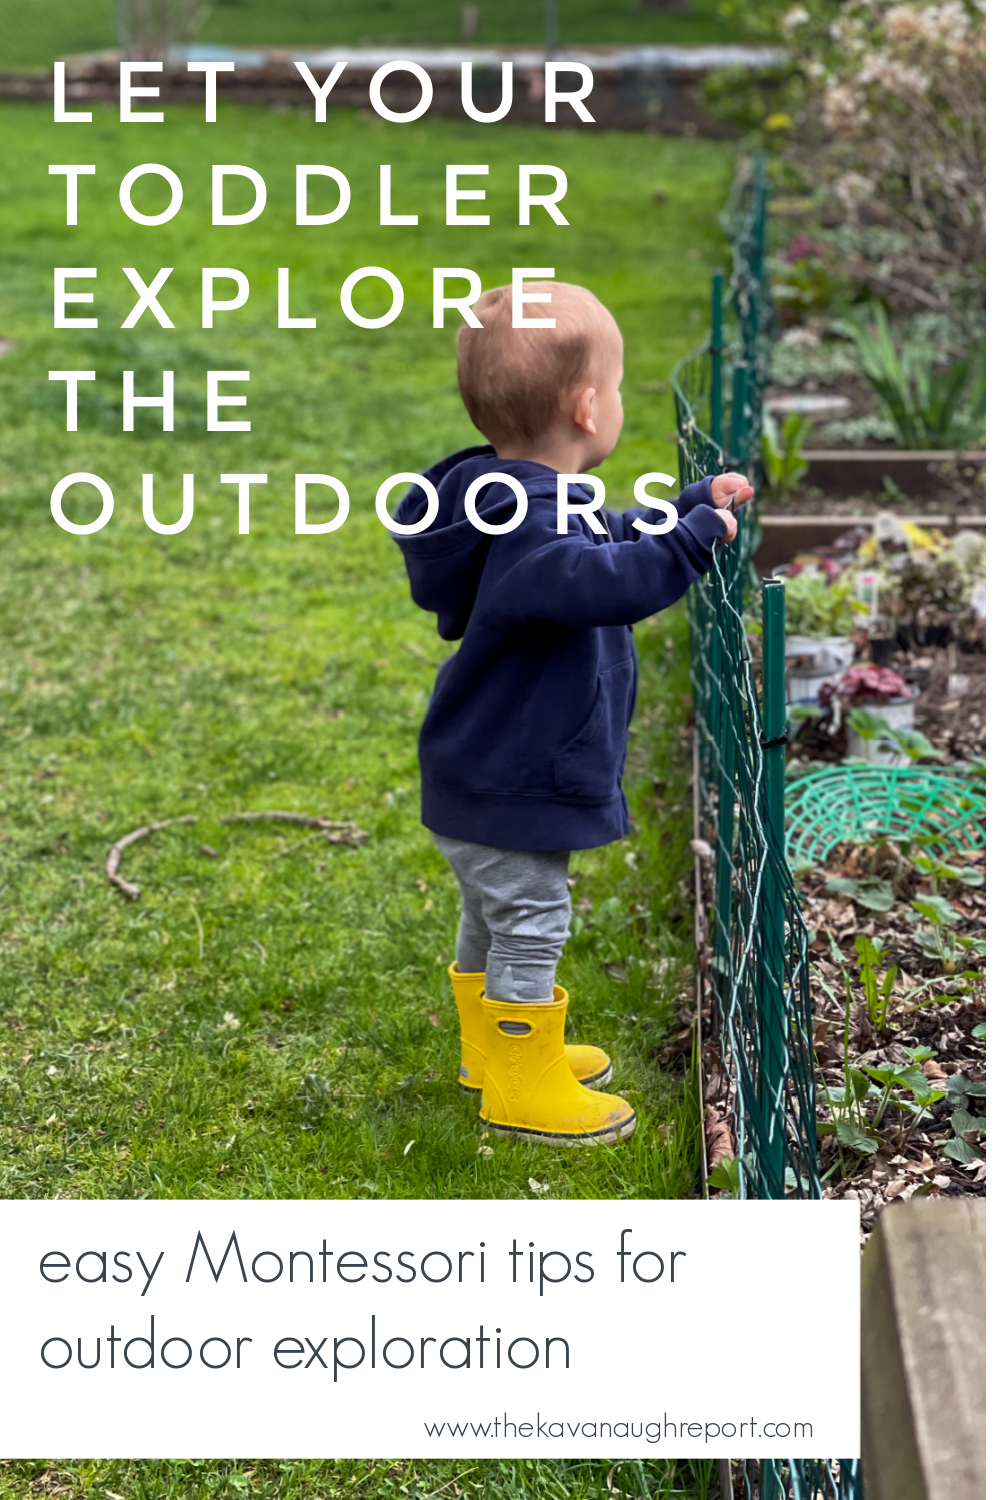 Easy, free tips for allowing toddlers to get outside and explore. These Montessori parenting tips balance the need to move with safety concerns.